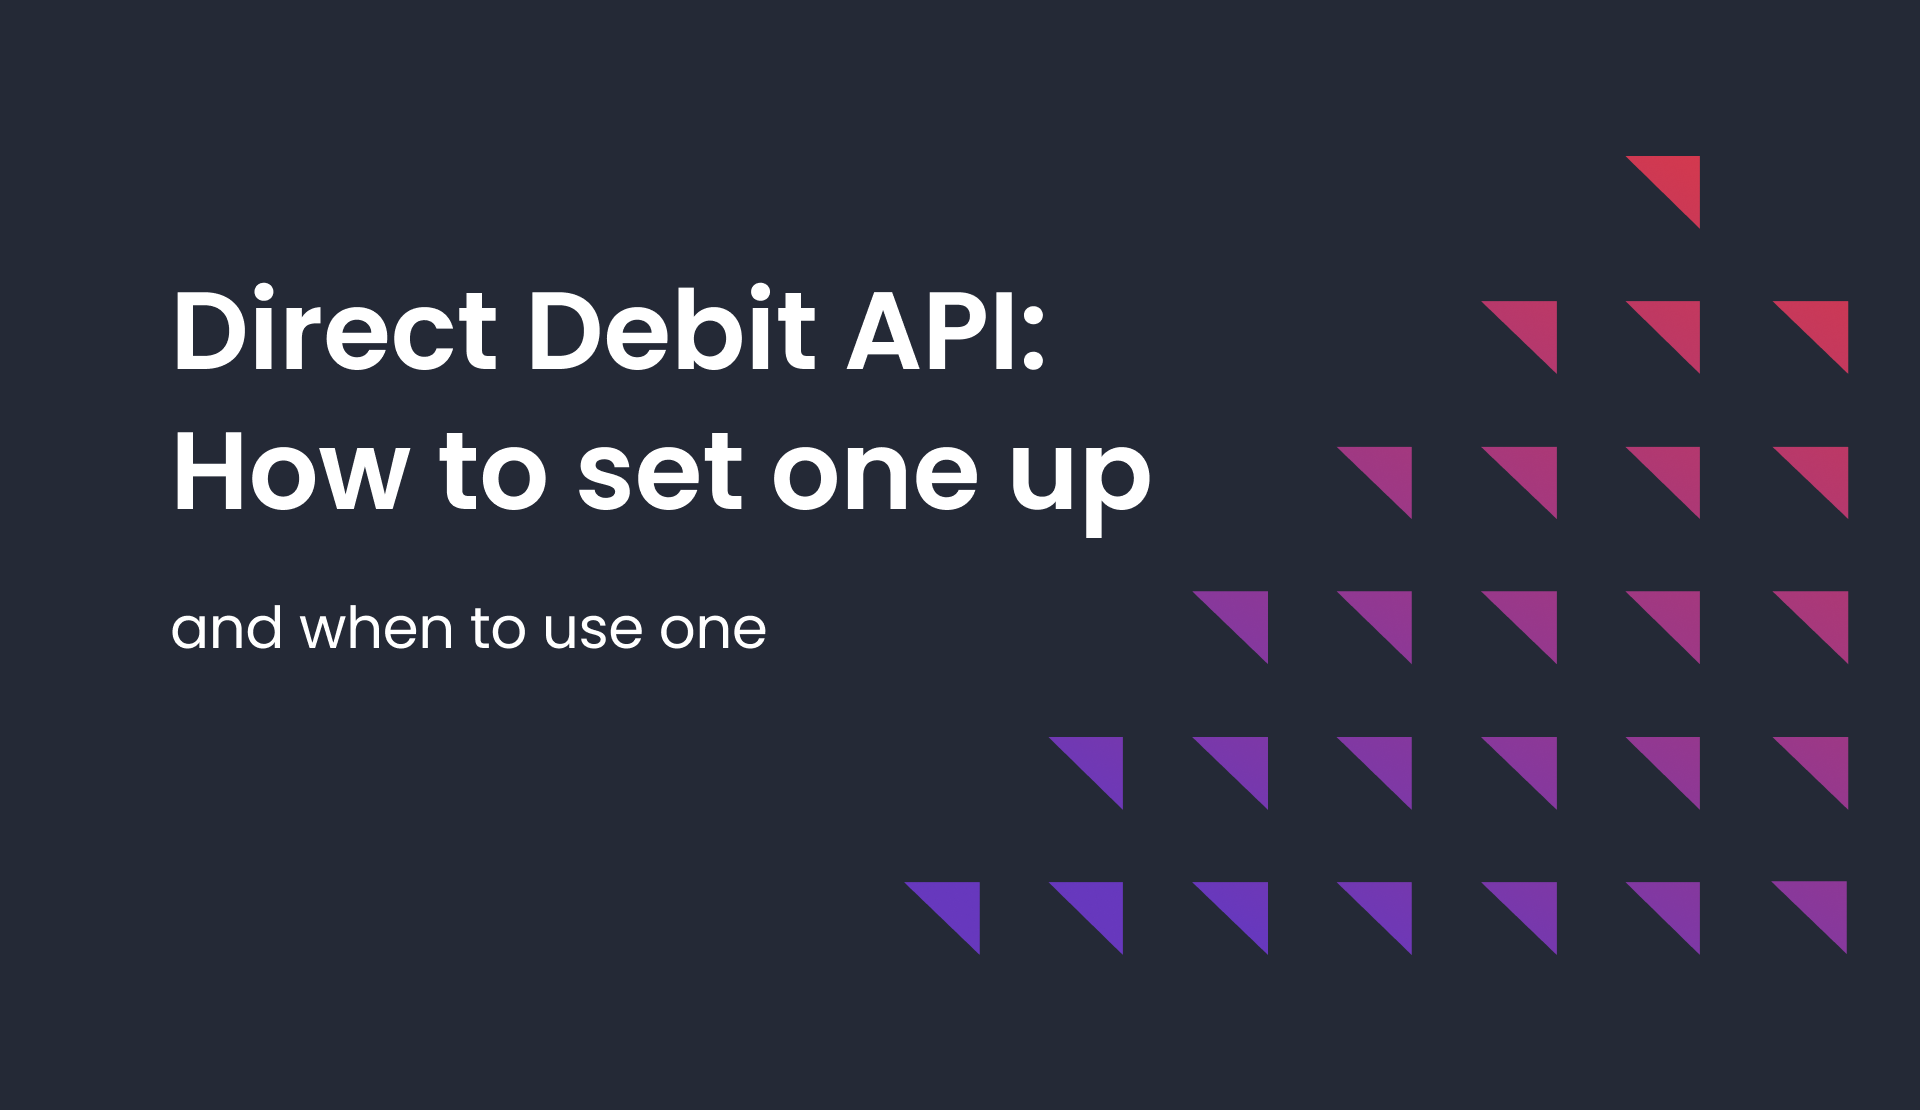 Direct Debit API: How to set one up (and when to use one)